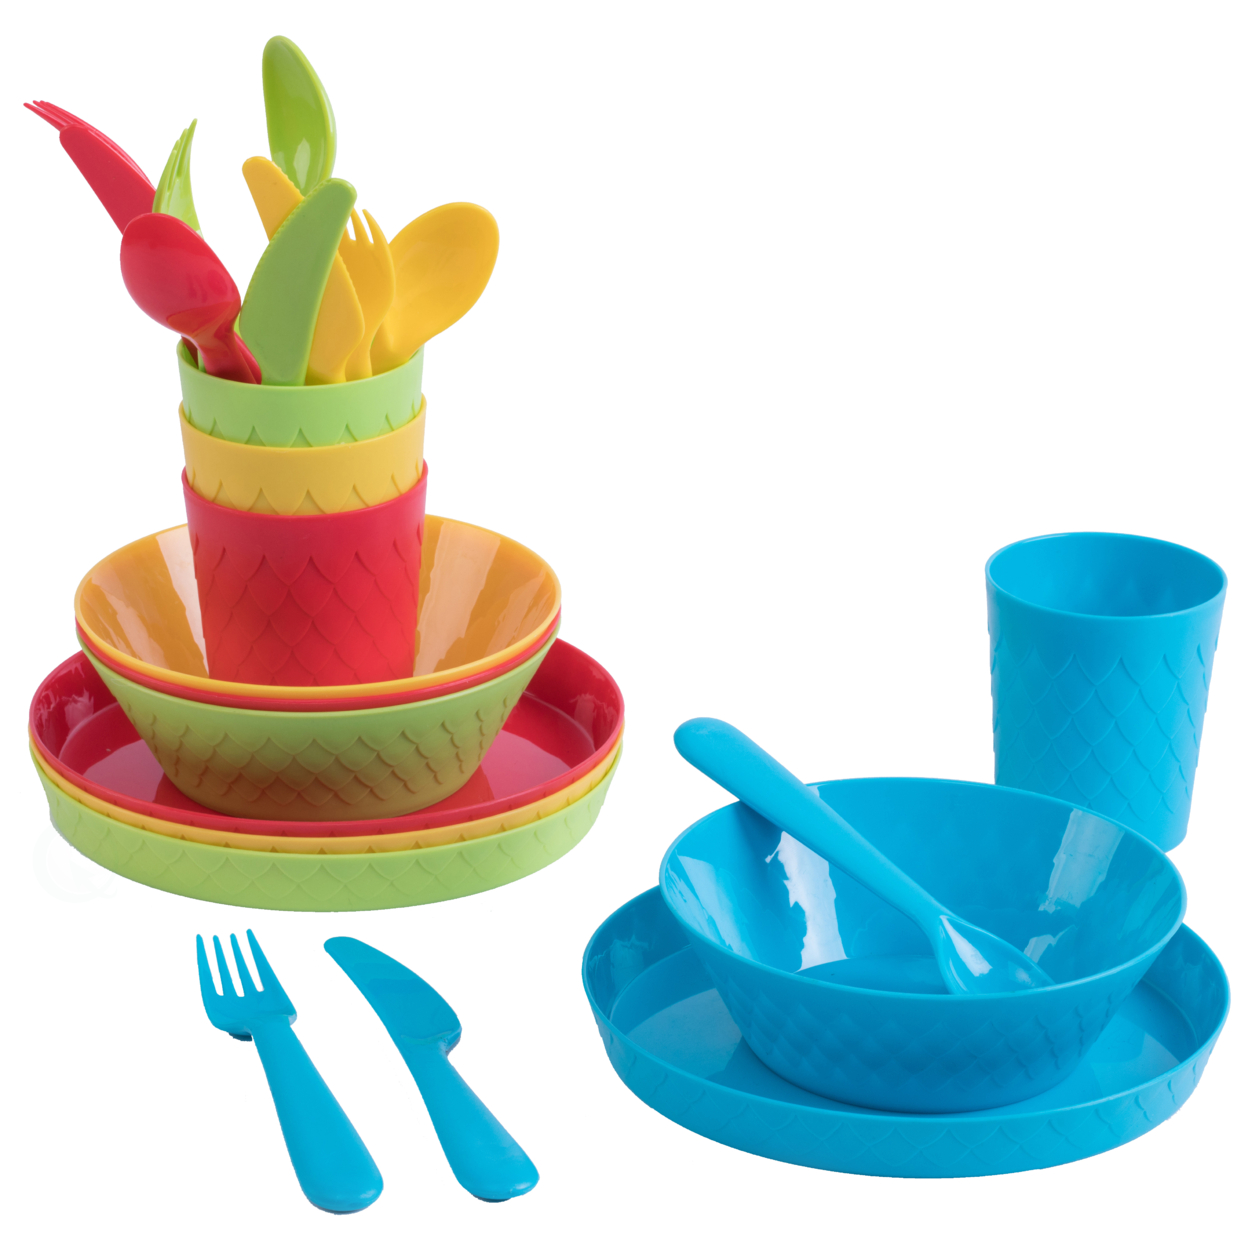 24-Piece Kids Dinnerware Set Plastic 4 Plates, 4 Bowls, 4 Cups, 4 Forks, 4 Knives, And 4 Spoons